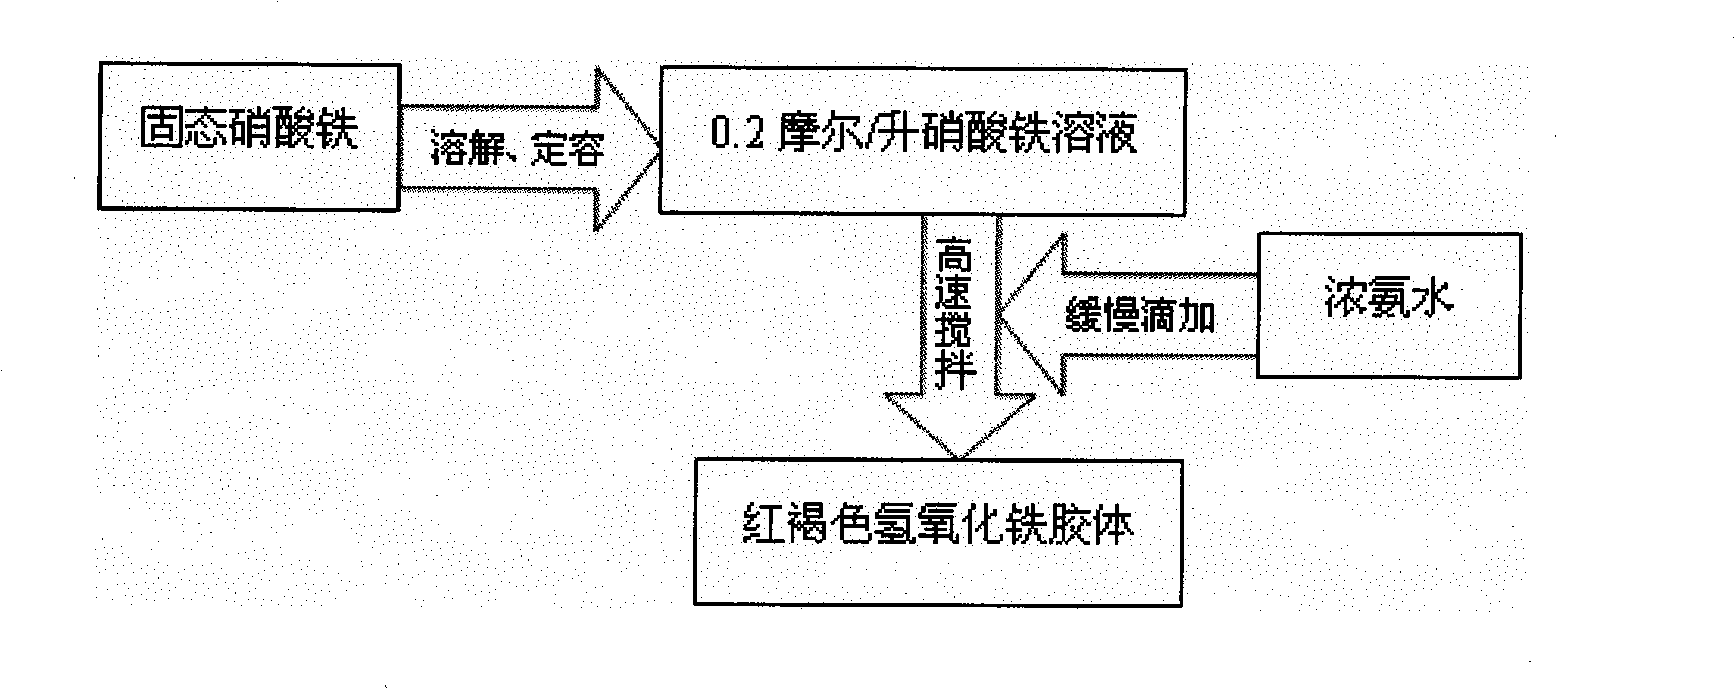 Method for inhibiting carbon dioxide released by mineralizing organic material